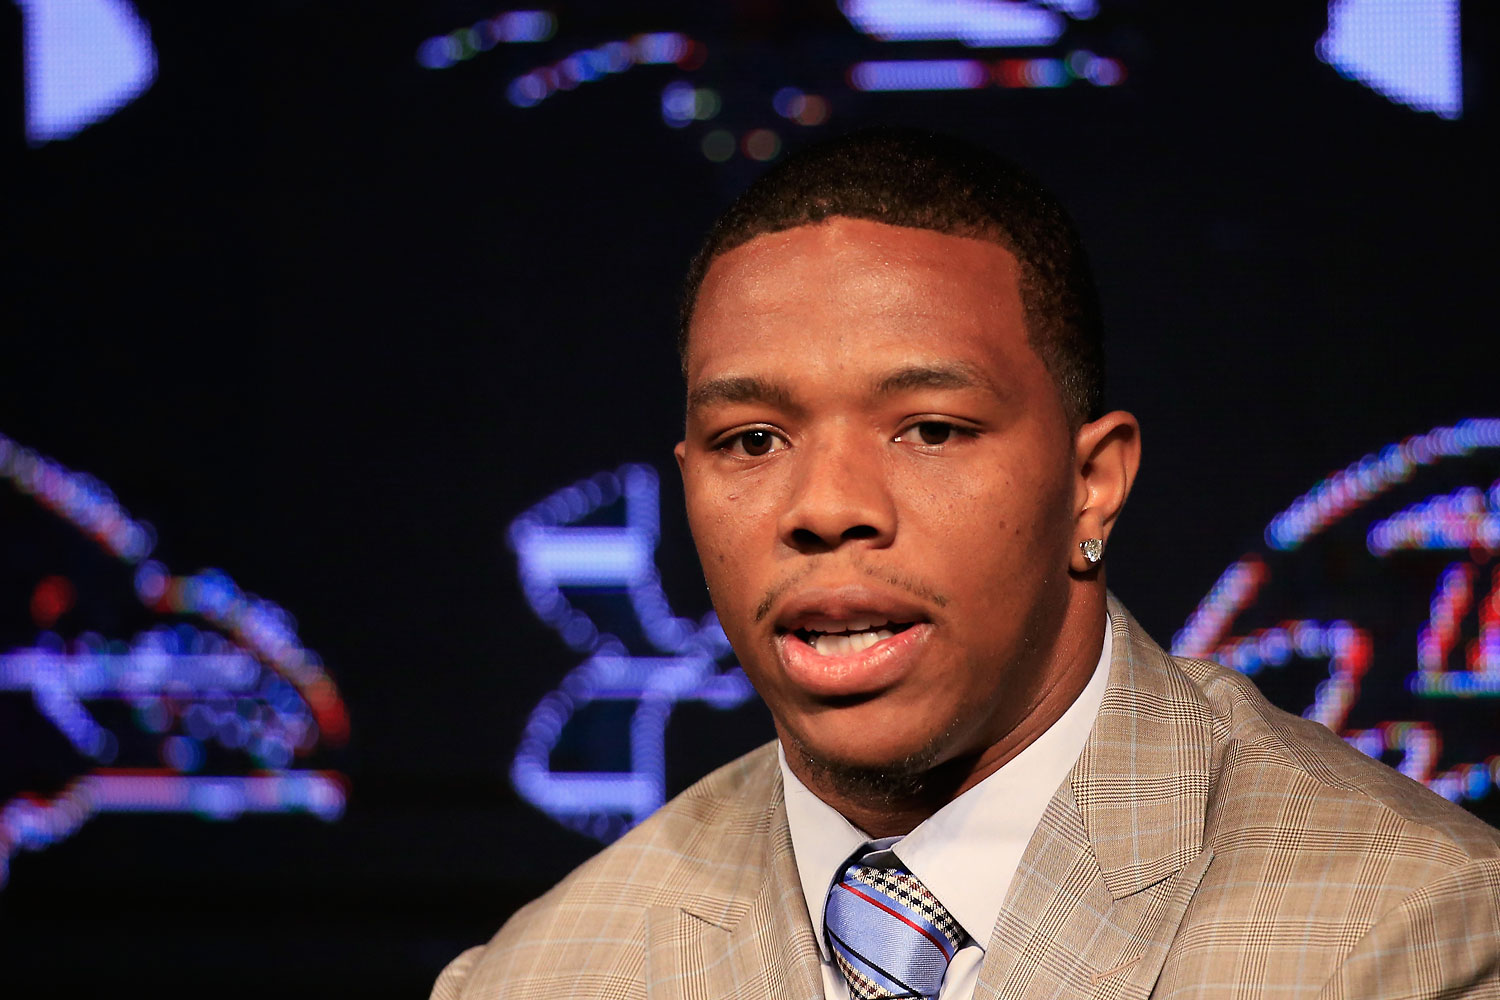 Running back Ray Rice of the Baltimore Ravens addresses a news conference with his wife Janay (not pictured) at the Ravens training center on May 23, 2014 in Owings Mills, Maryland. (Rob Carr—Getty Images)